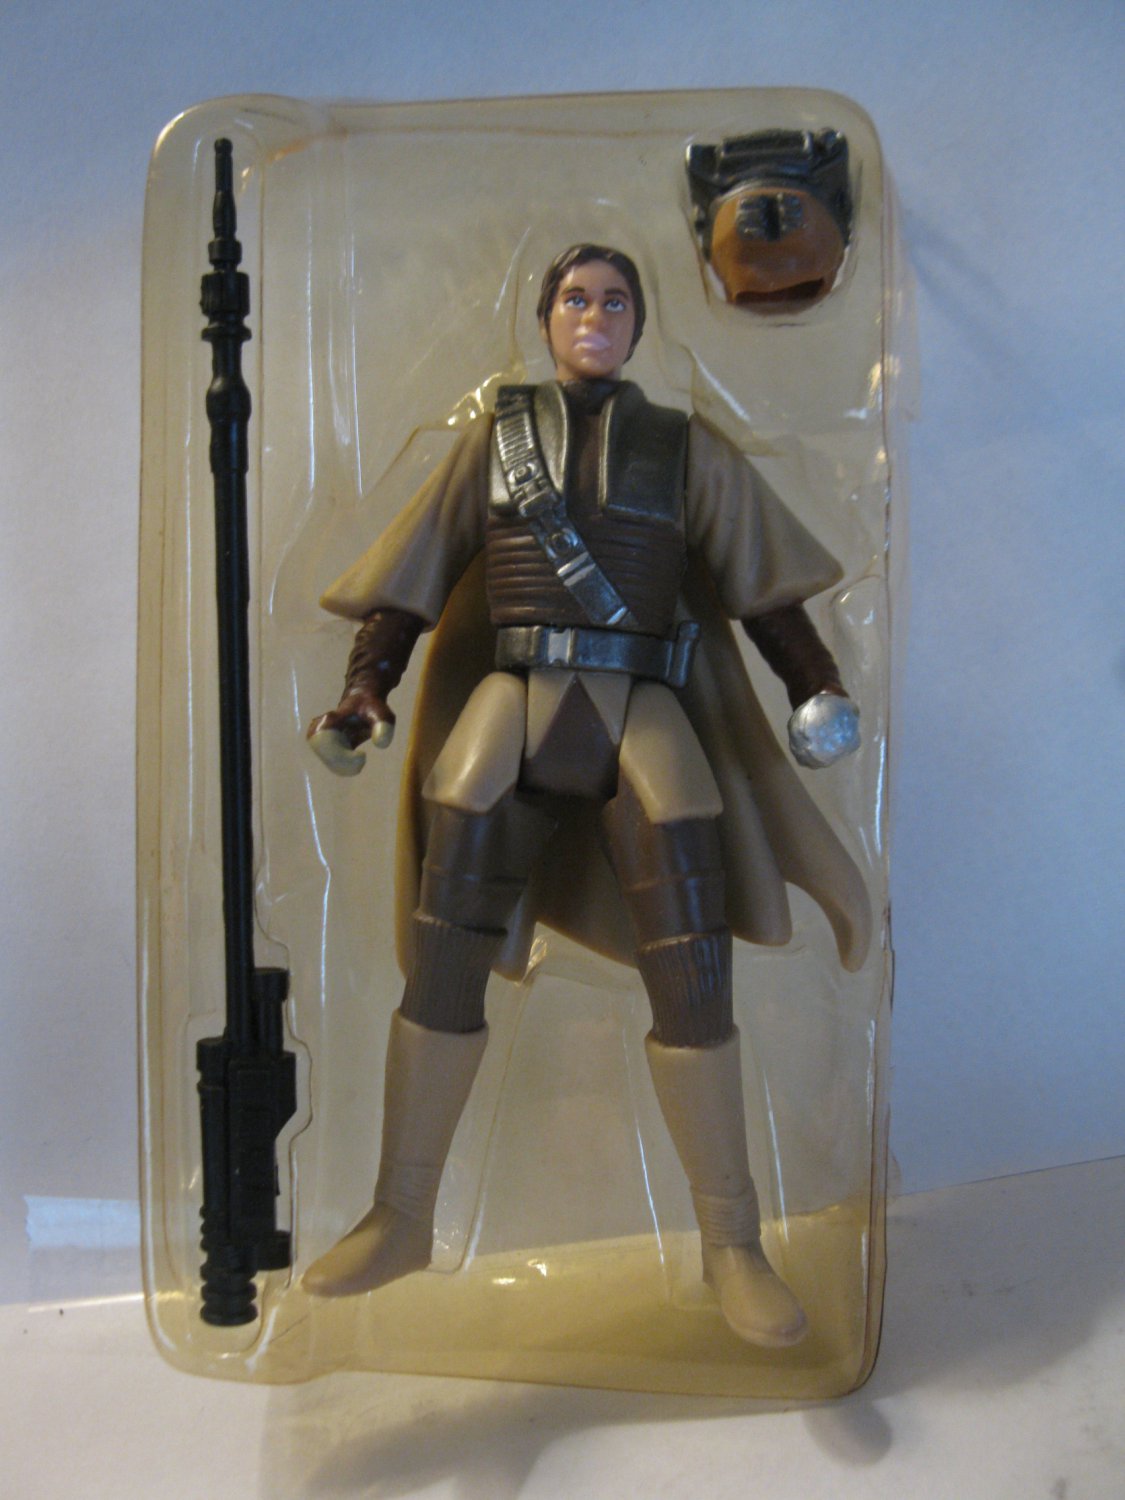 BX-5) 1996 Star Wars POTF Action Figure - Leia in Bosch Outfit